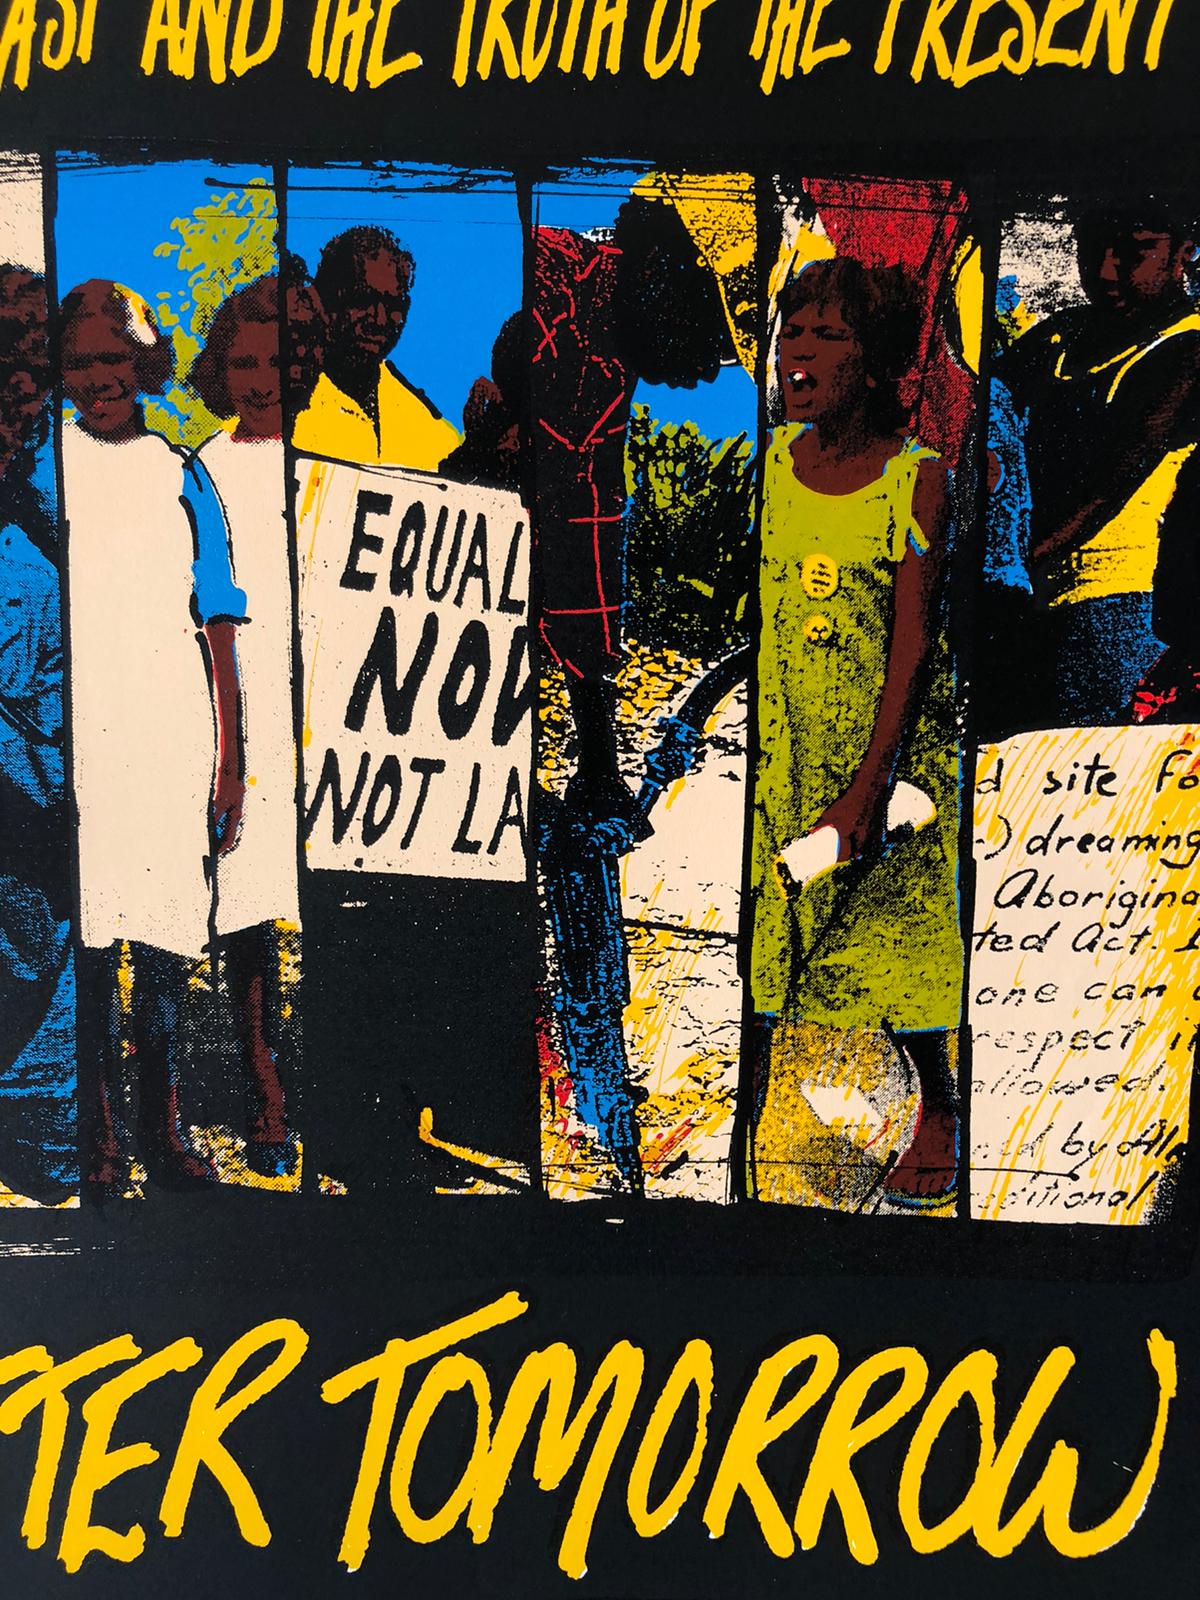 "We Are Not Racists" Australian Anti-Racism 1980s Campaign Poster